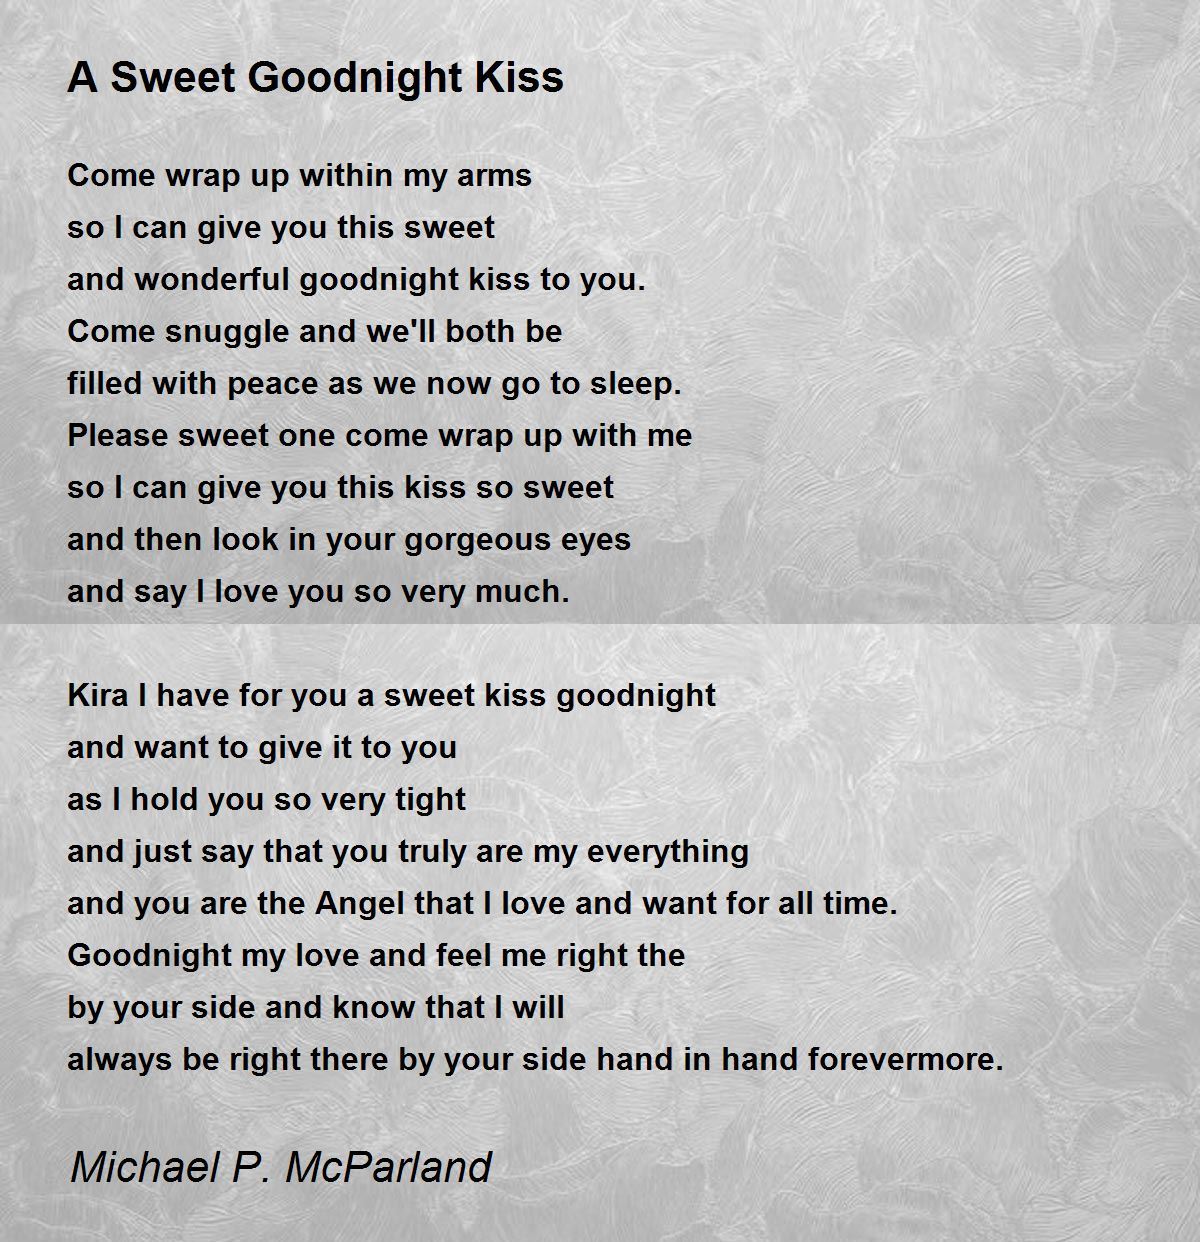 A Sweet Goodnight Kiss - A Sweet Goodnight Kiss Poem by Michael P ...